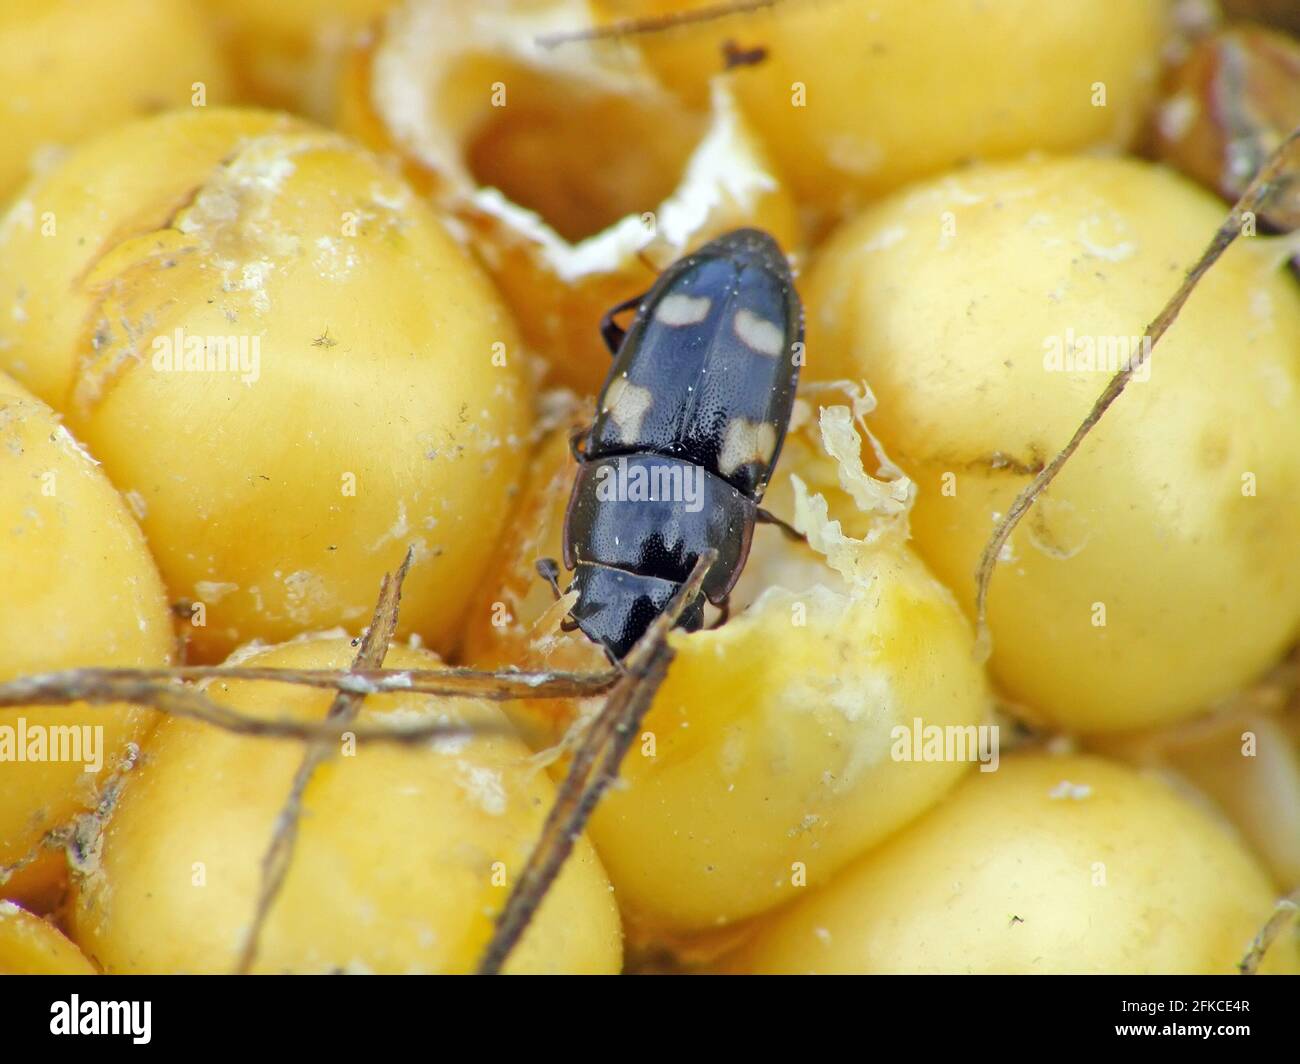 Corn cob and grains damaged by Glischrochilus quadrisignatus (Nitidulidae) Four-spotted Sap Beetle. Stock Photo